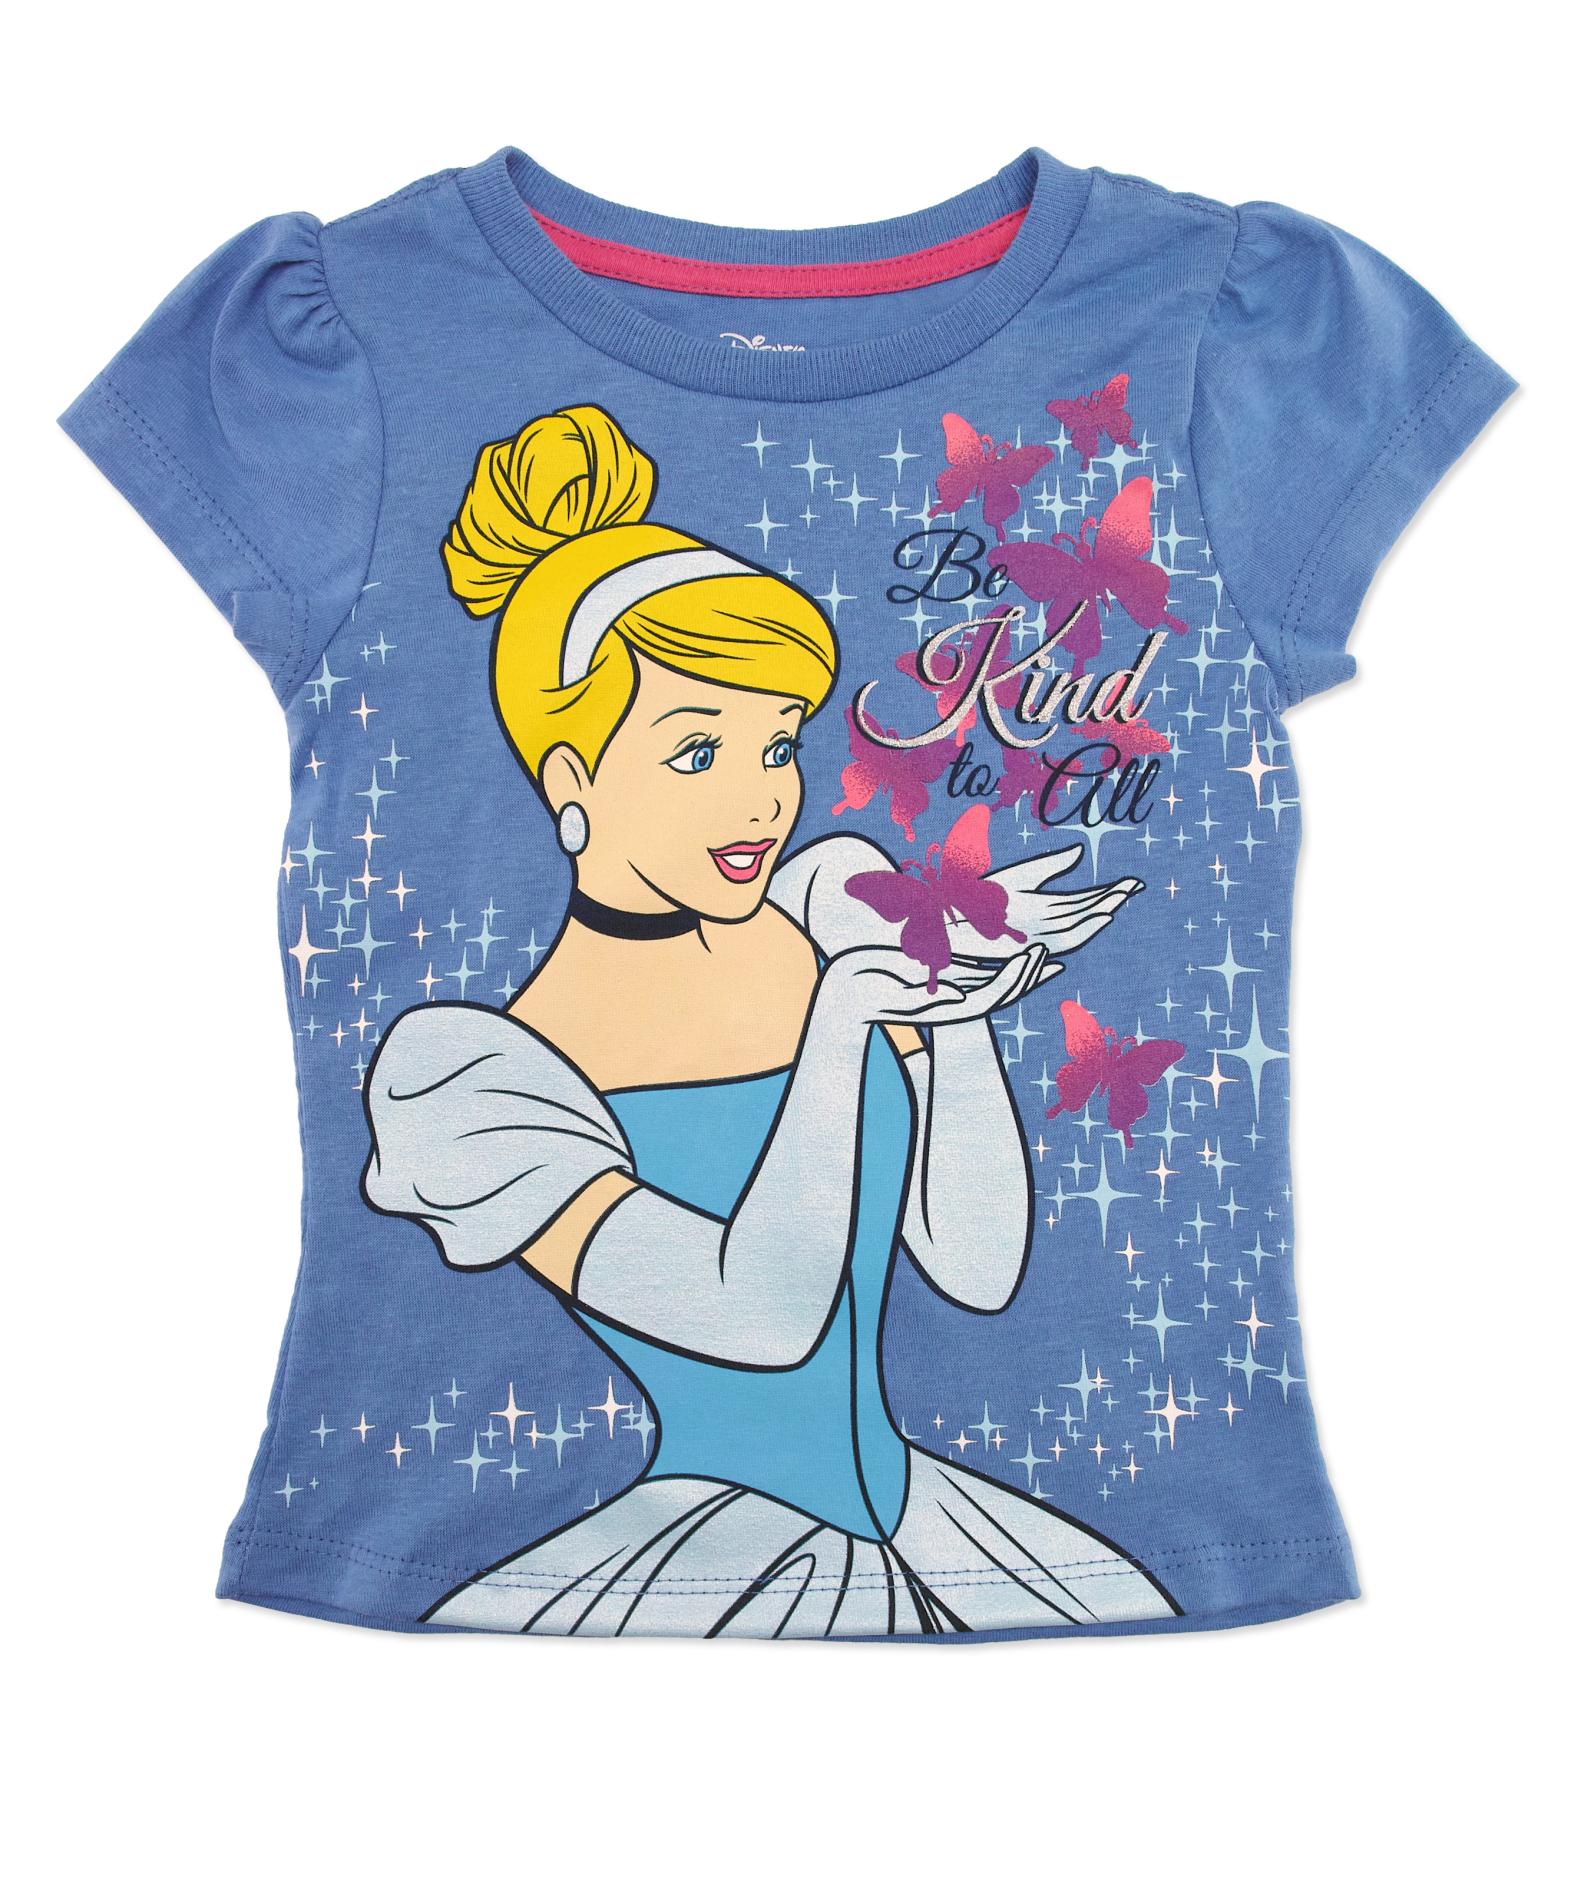 Disney Cinderella Toddler Girl's Graphic T-Shirt - Be Kind To All